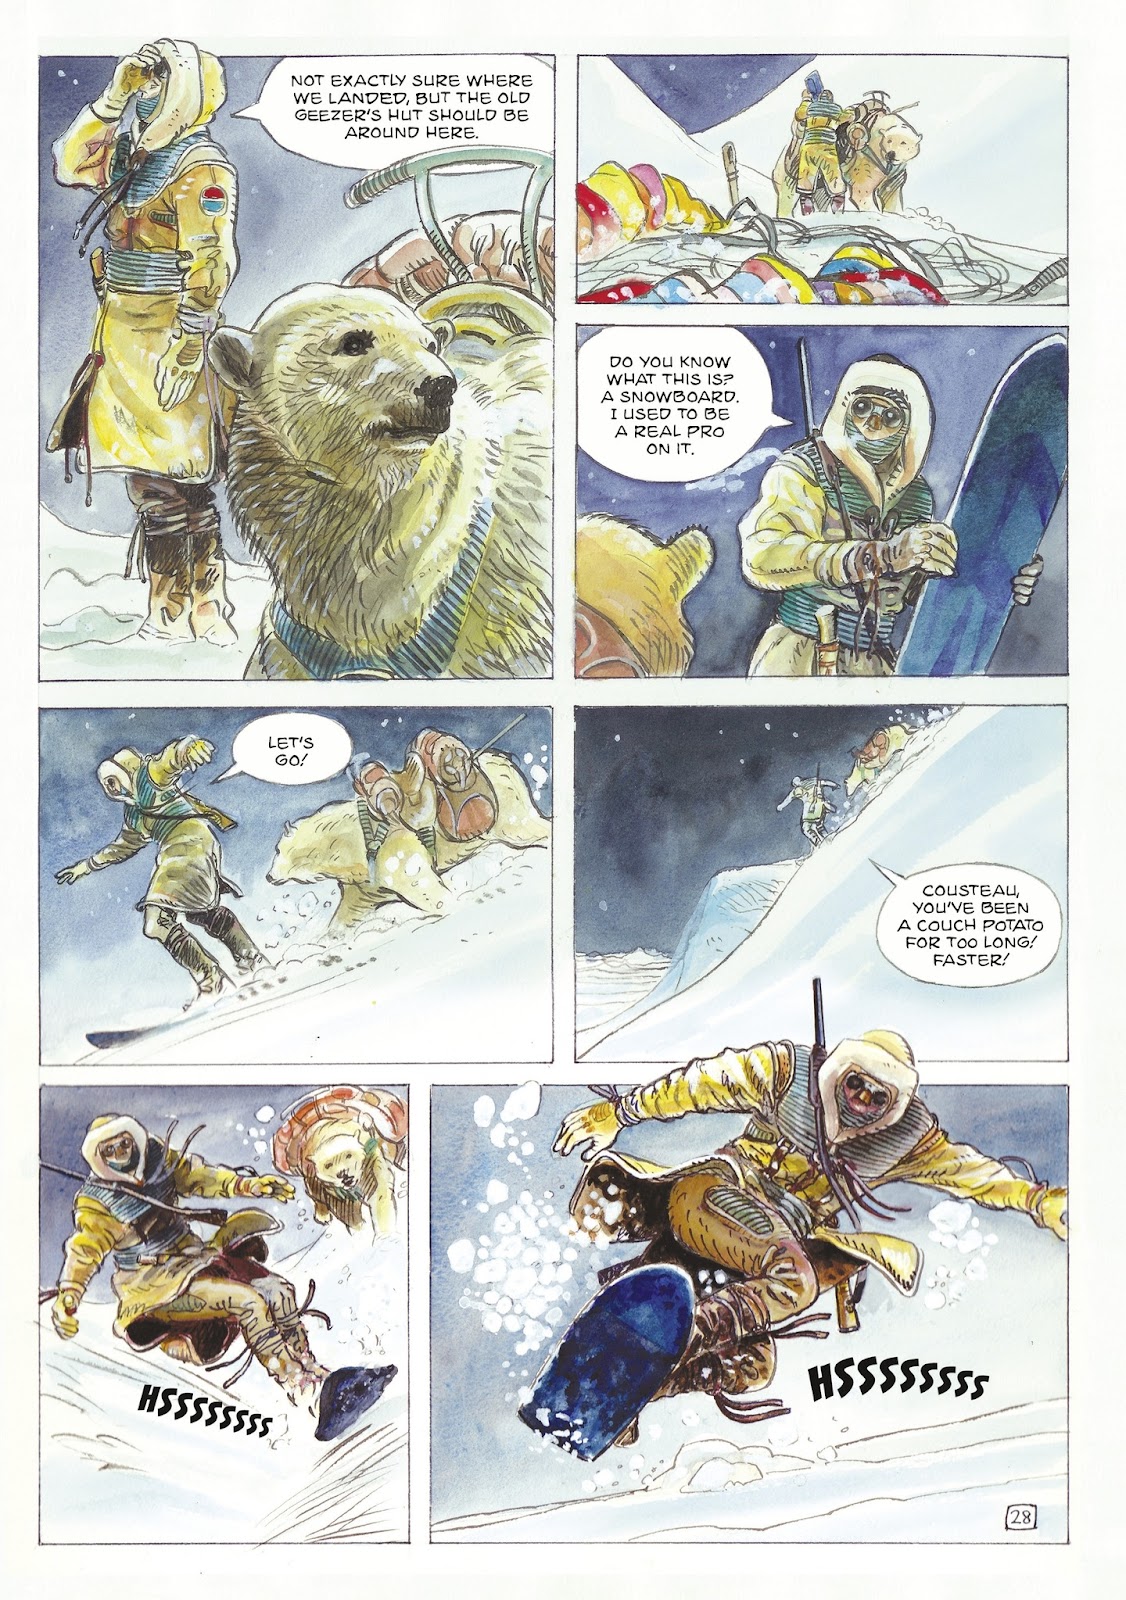 The Man With the Bear issue 1 - Page 30